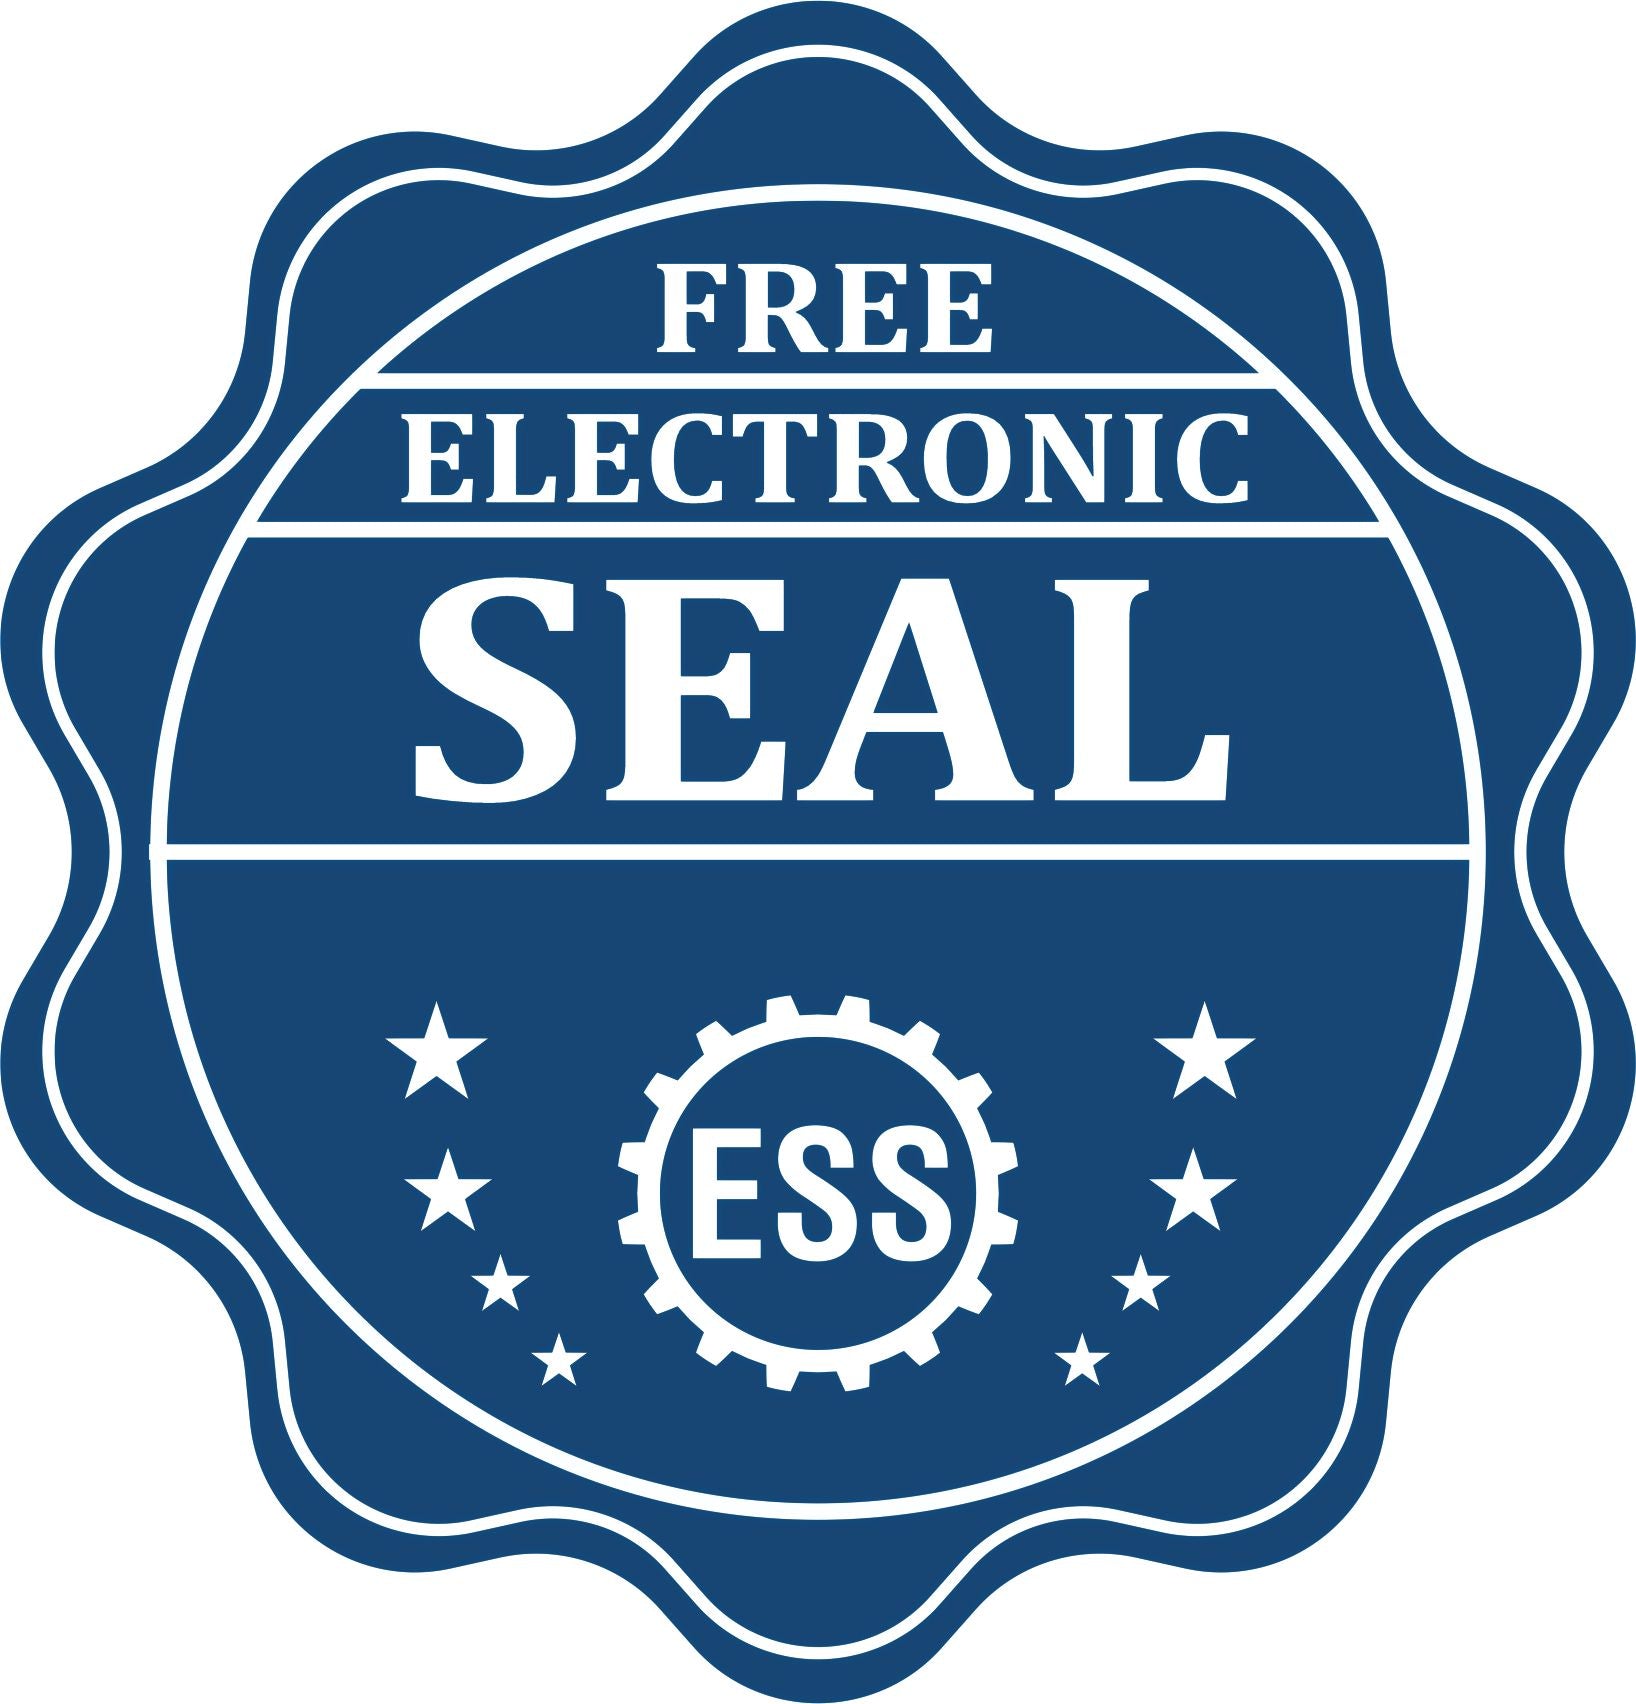 A badge showing a free electronic seal for the Virginia Geologist Desk Seal with stars and the ESS gear on the emblem.